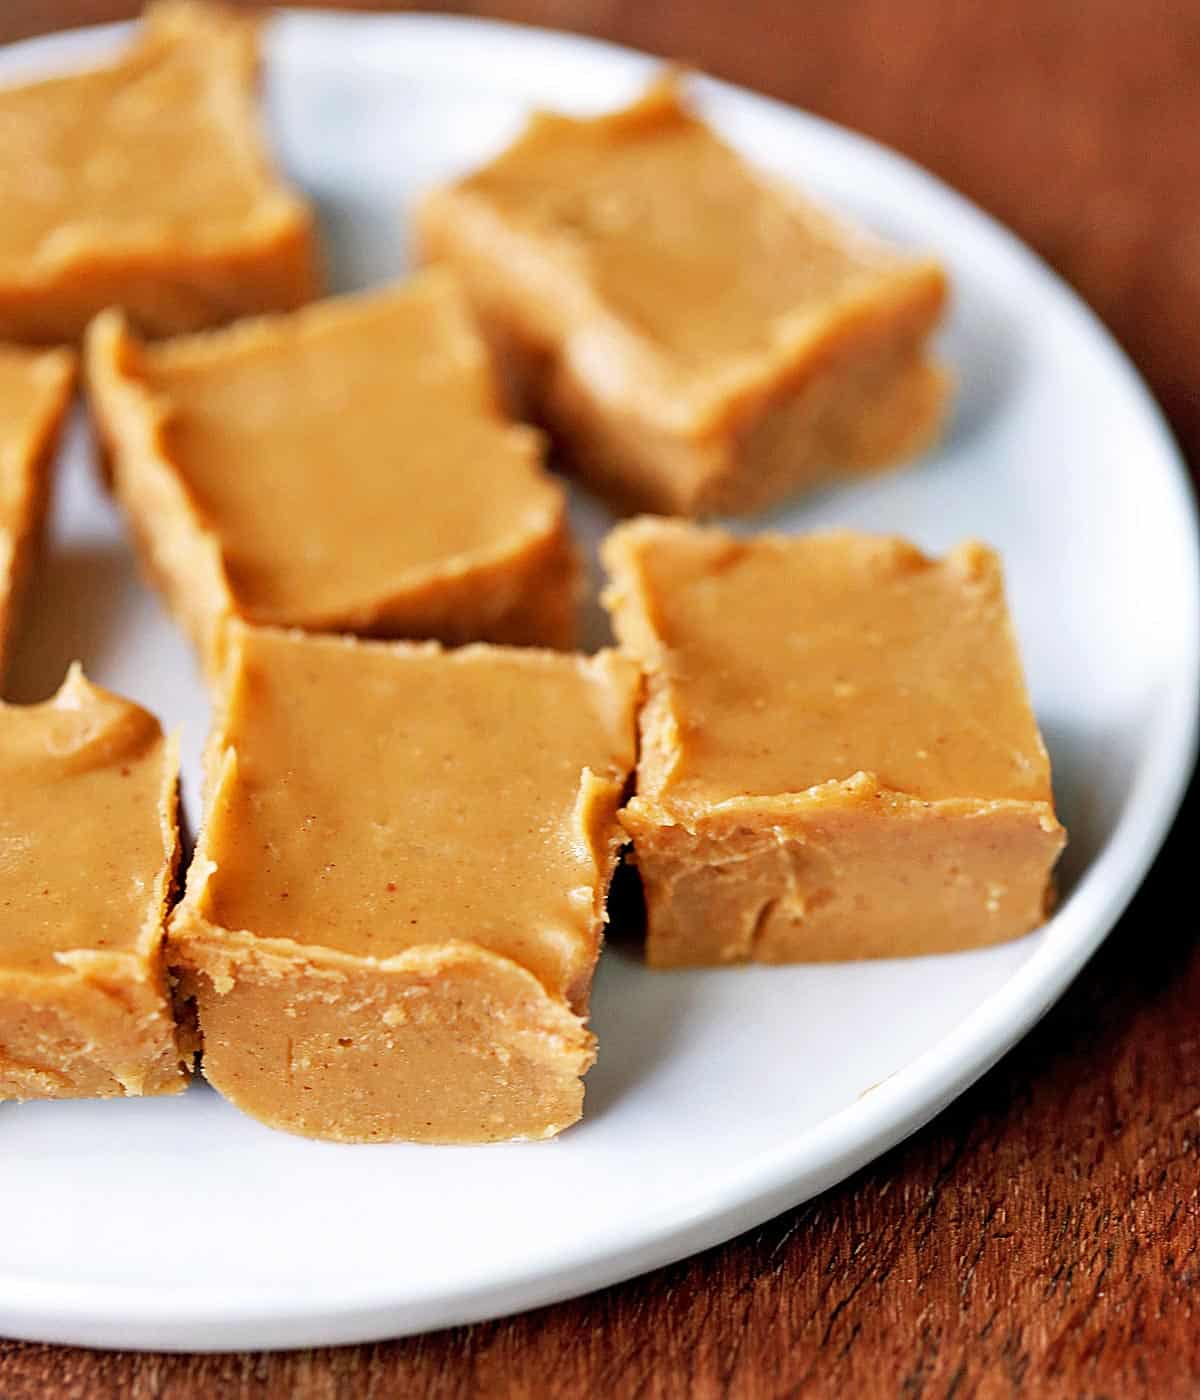 Keto peanut butter fudge squares served on a white plate.